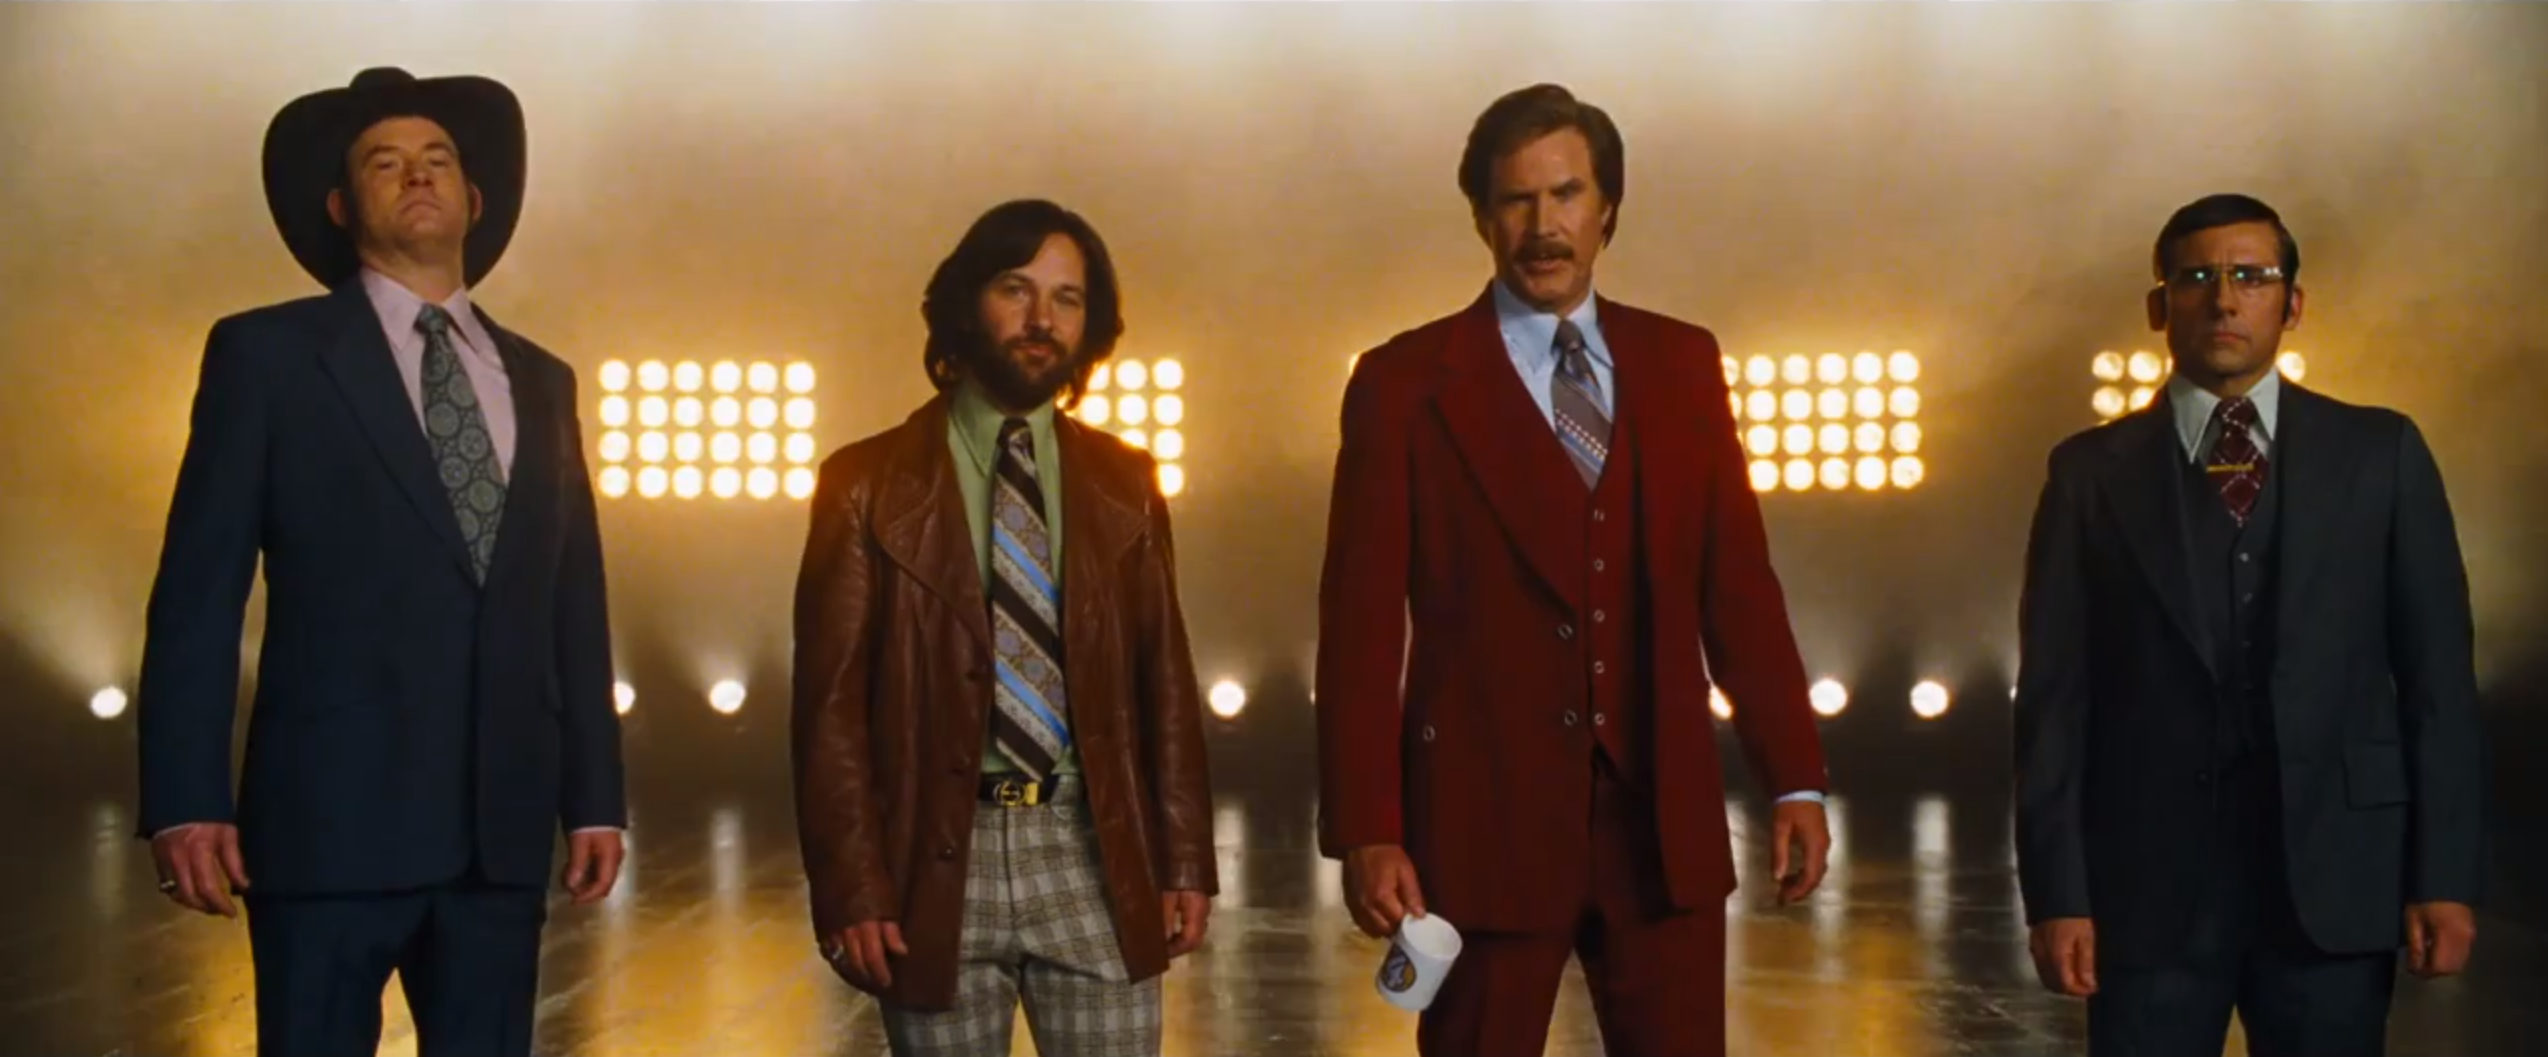 Film Review: Anchorman 2: The Legend Continues (2013) – Film Blerg